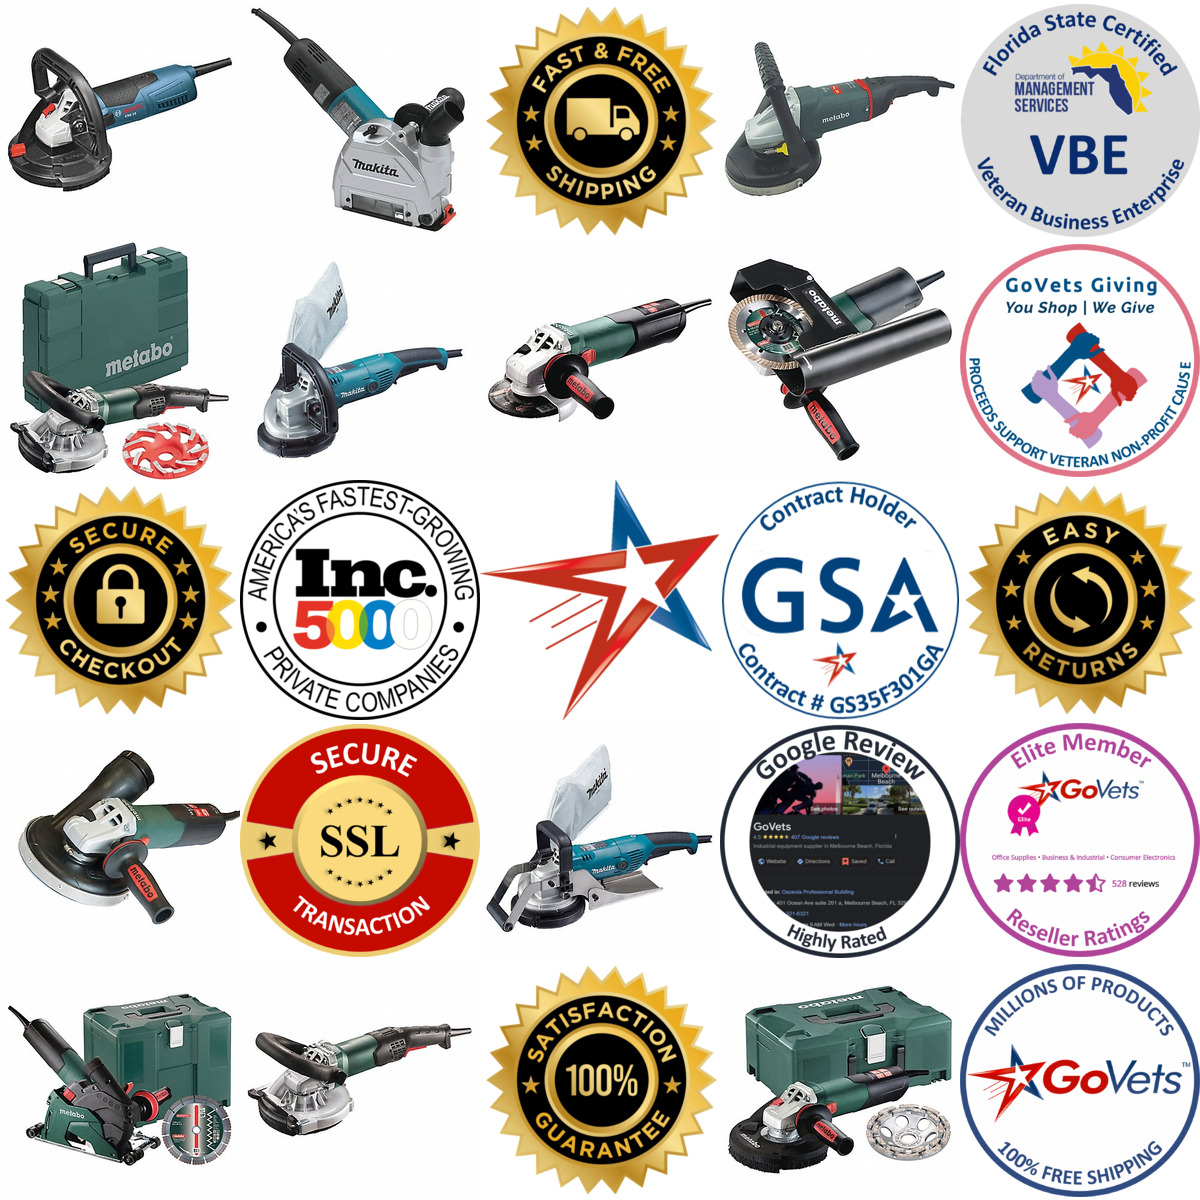 A selection of Corded Concrete and Masonry Grinders products on GoVets